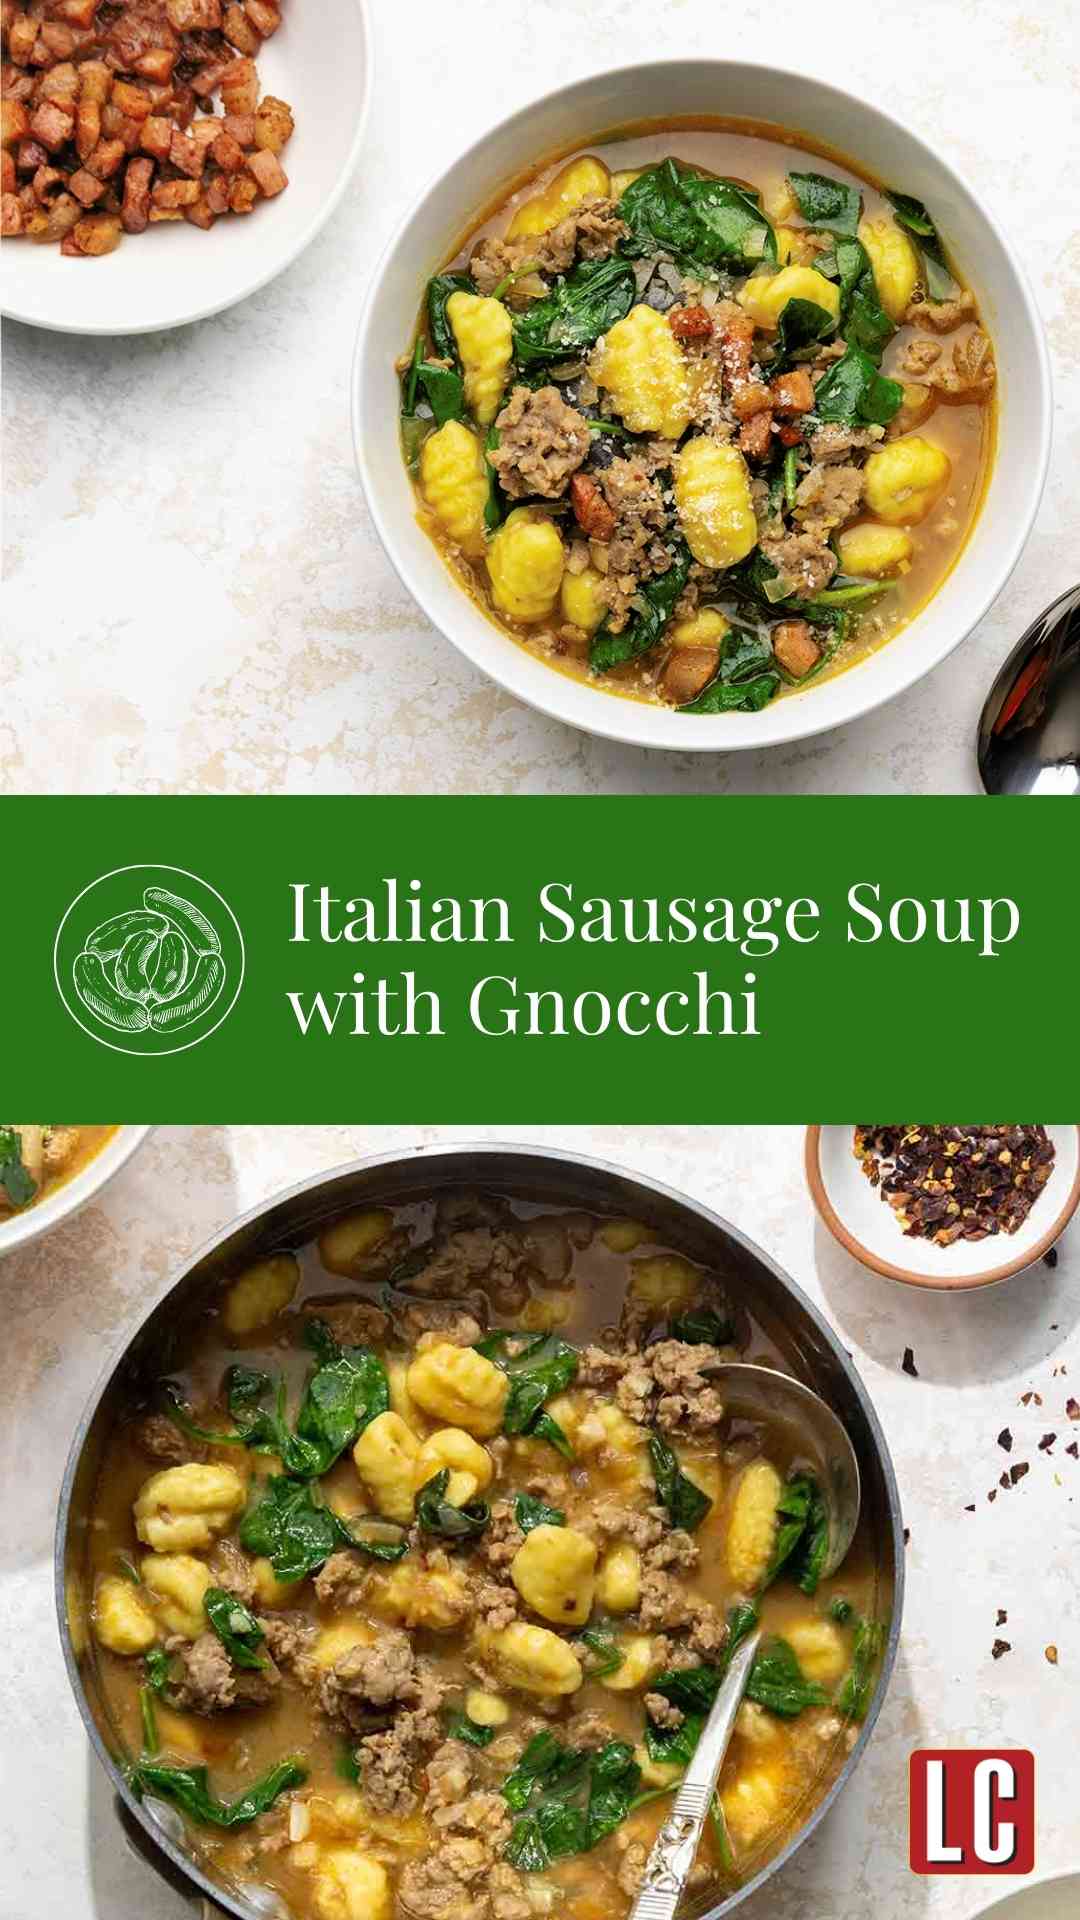 A pot and a bowl of bowl of Italian sausage soup with gnocchi.